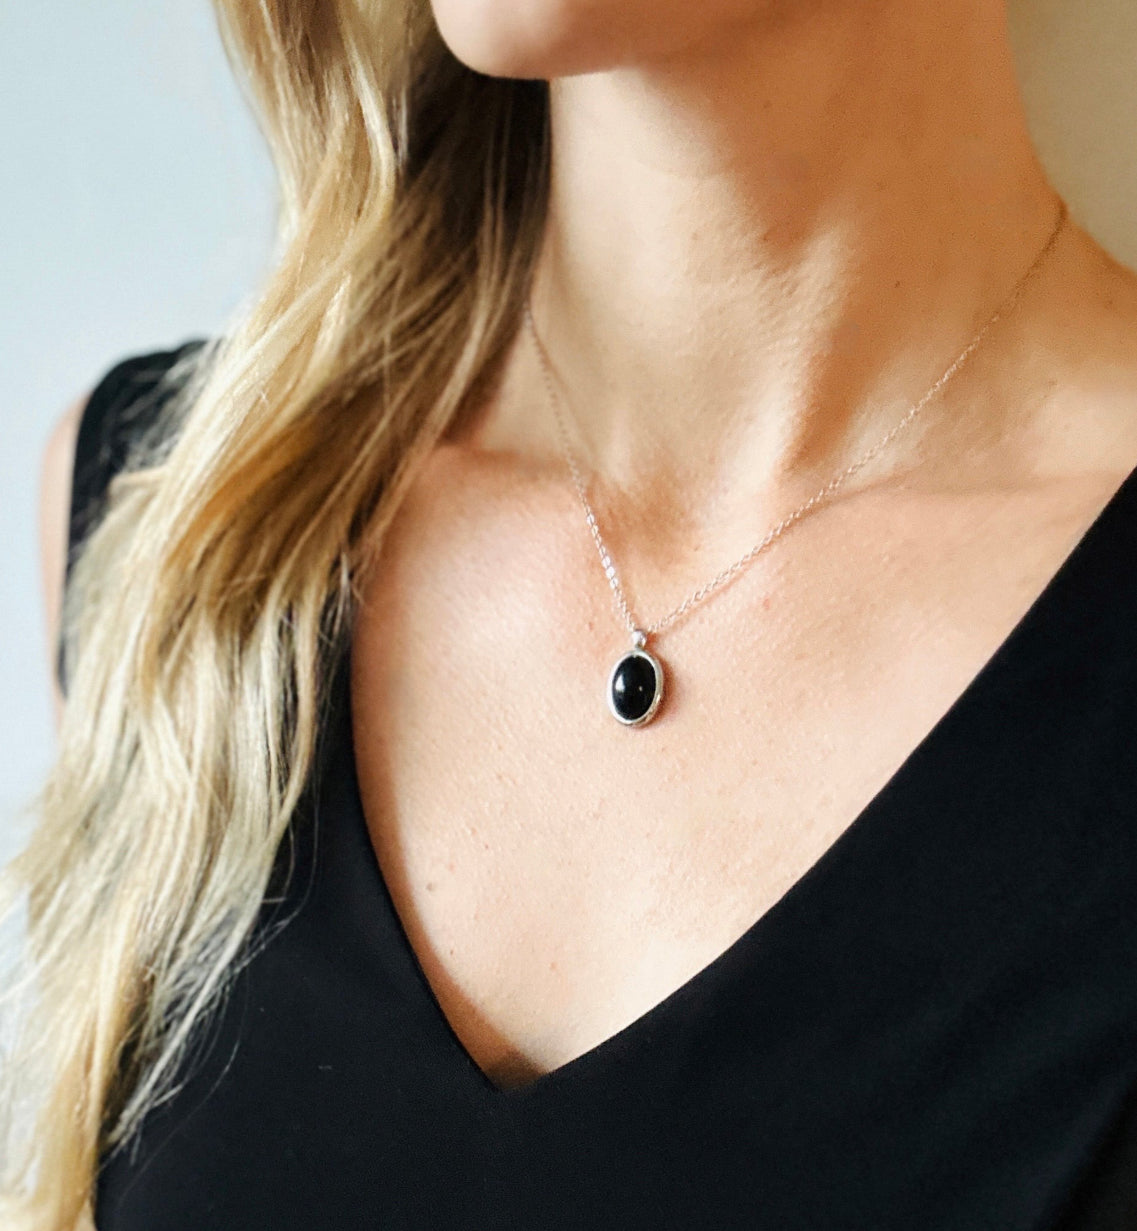 The Energy Protection Necklace